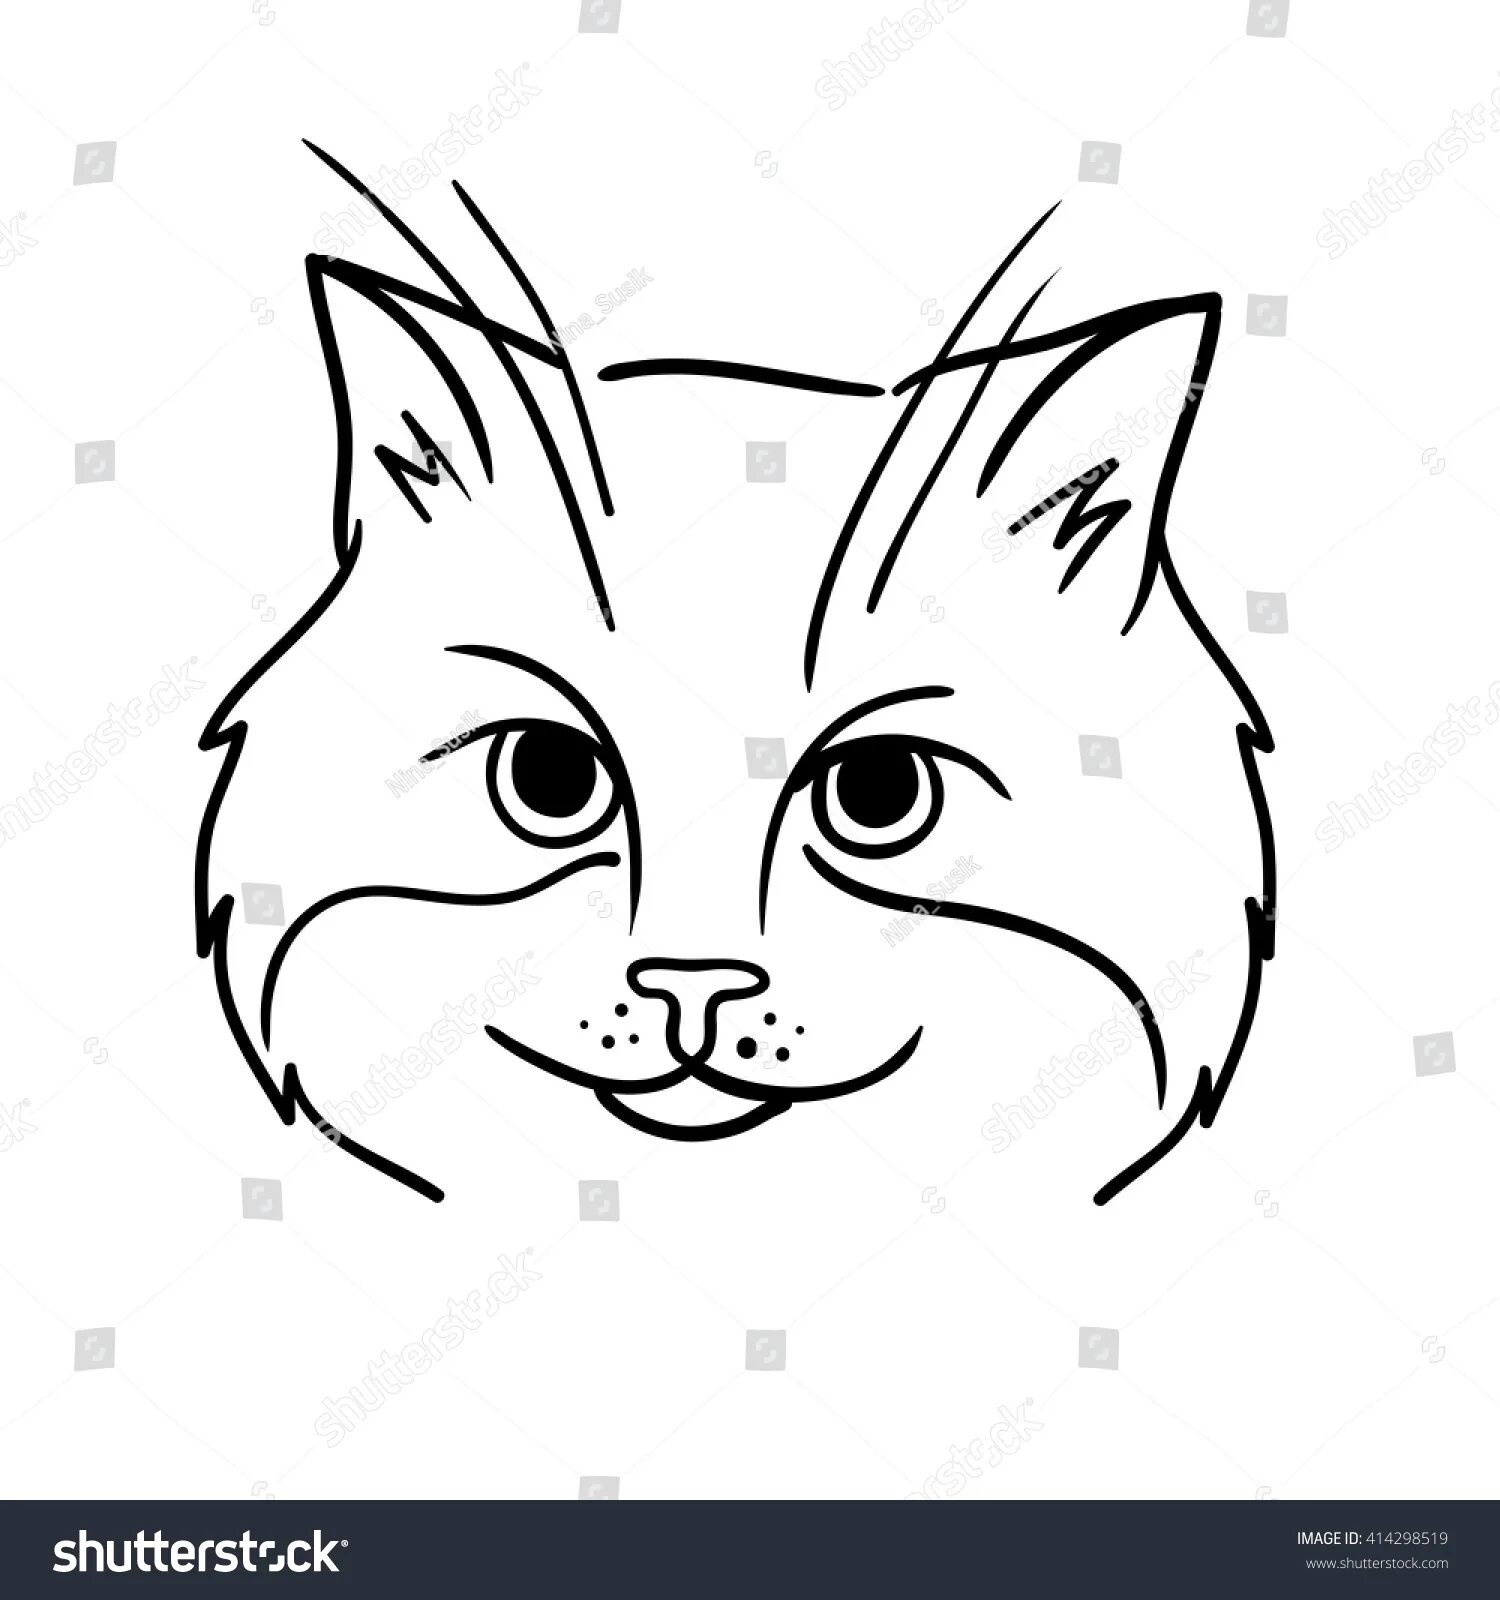 Smooth cat coloring page